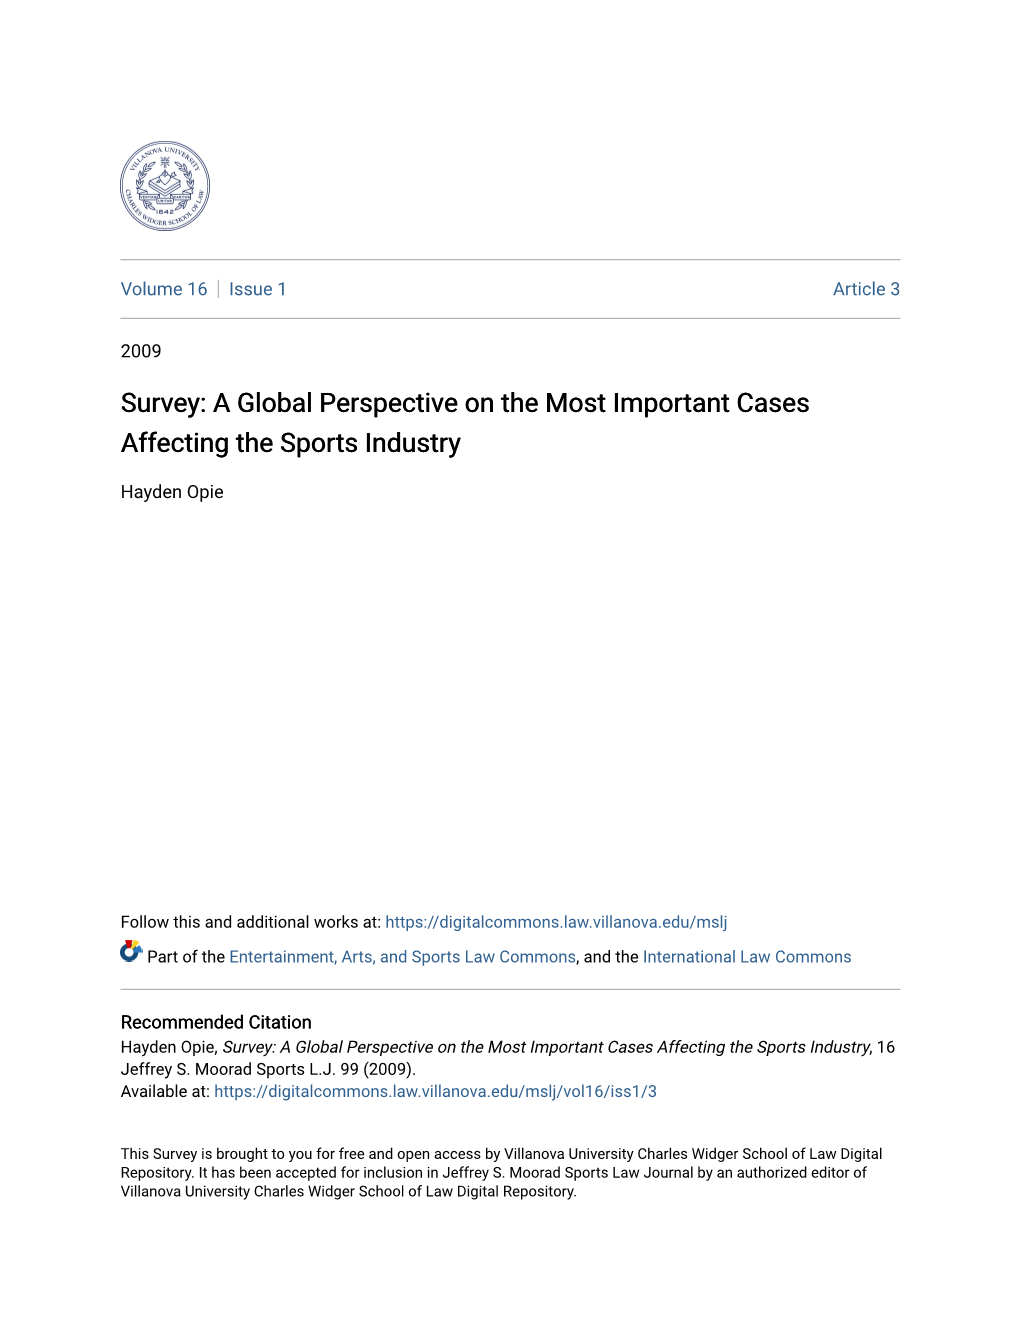 Survey: a Global Perspective on the Most Important Cases Affecting the Sports Industry